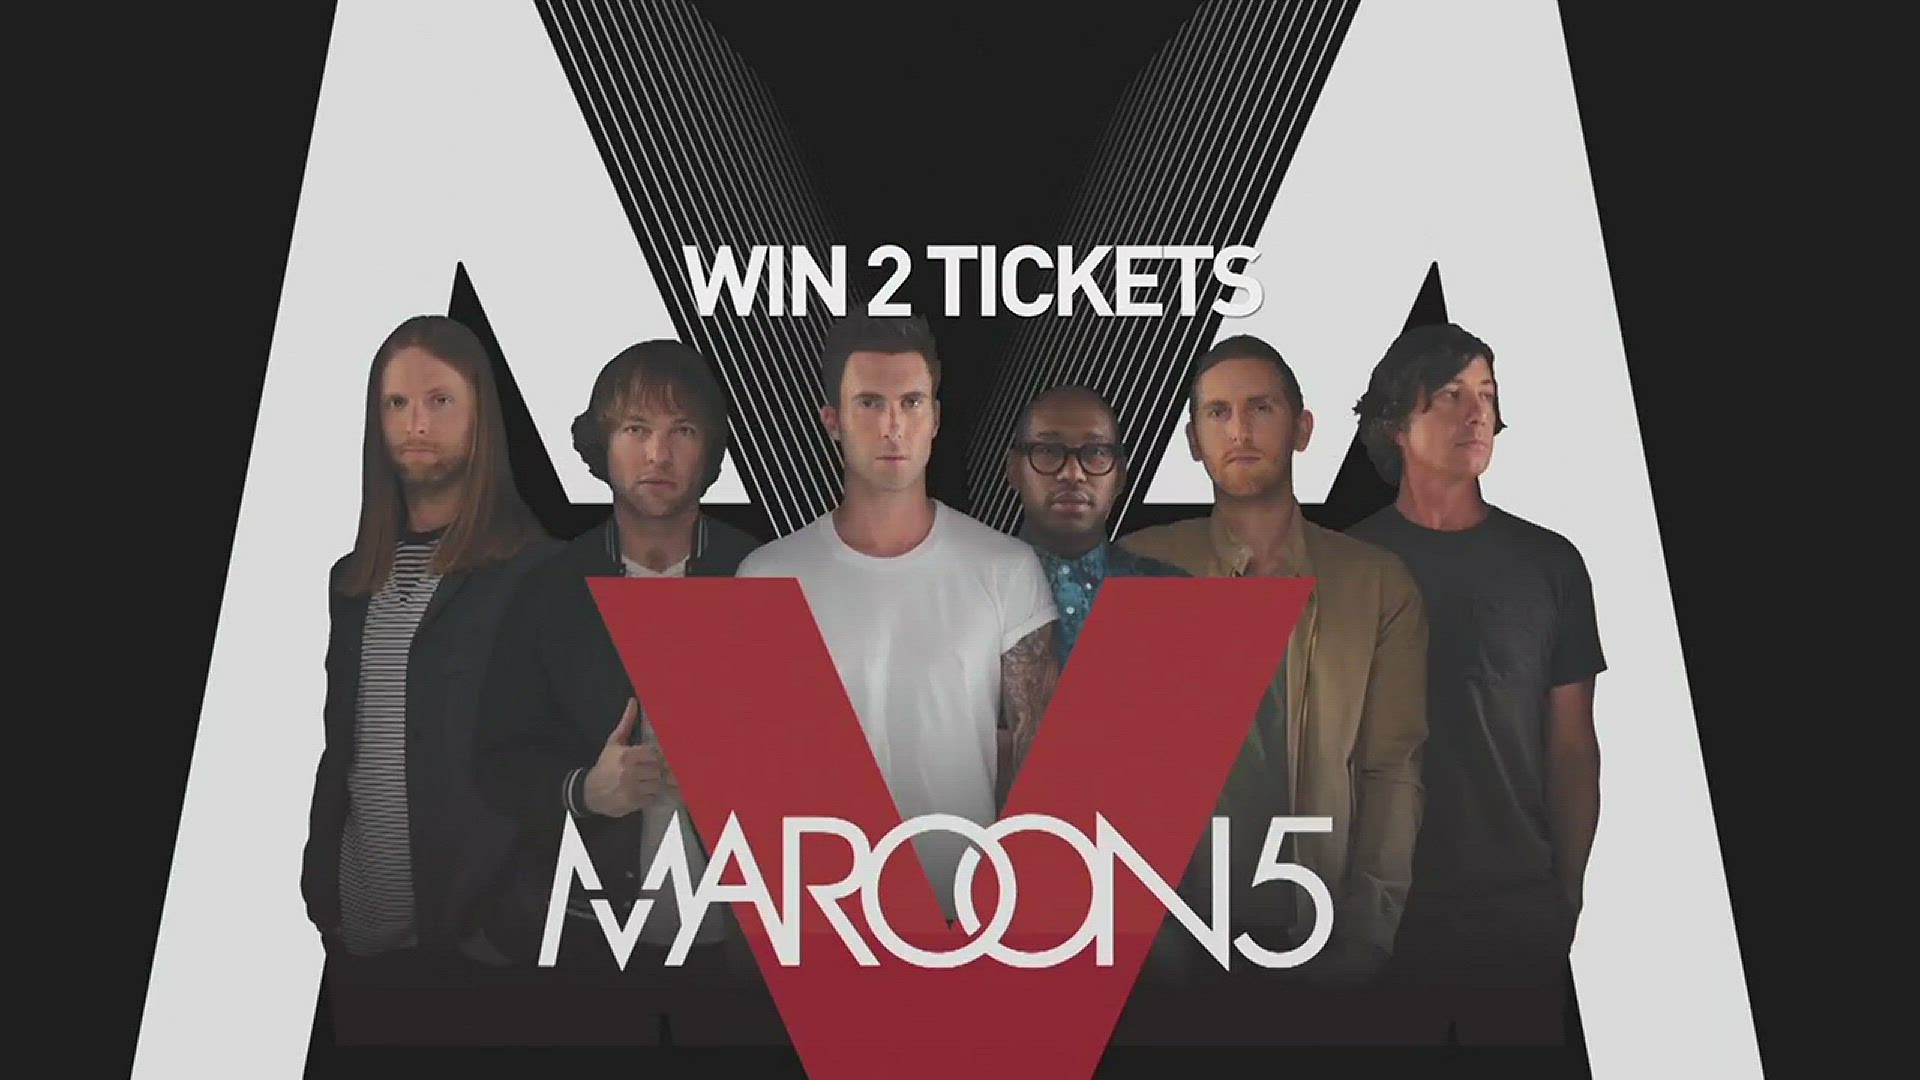 WBIR promotion for Maroon 5 tickets contest